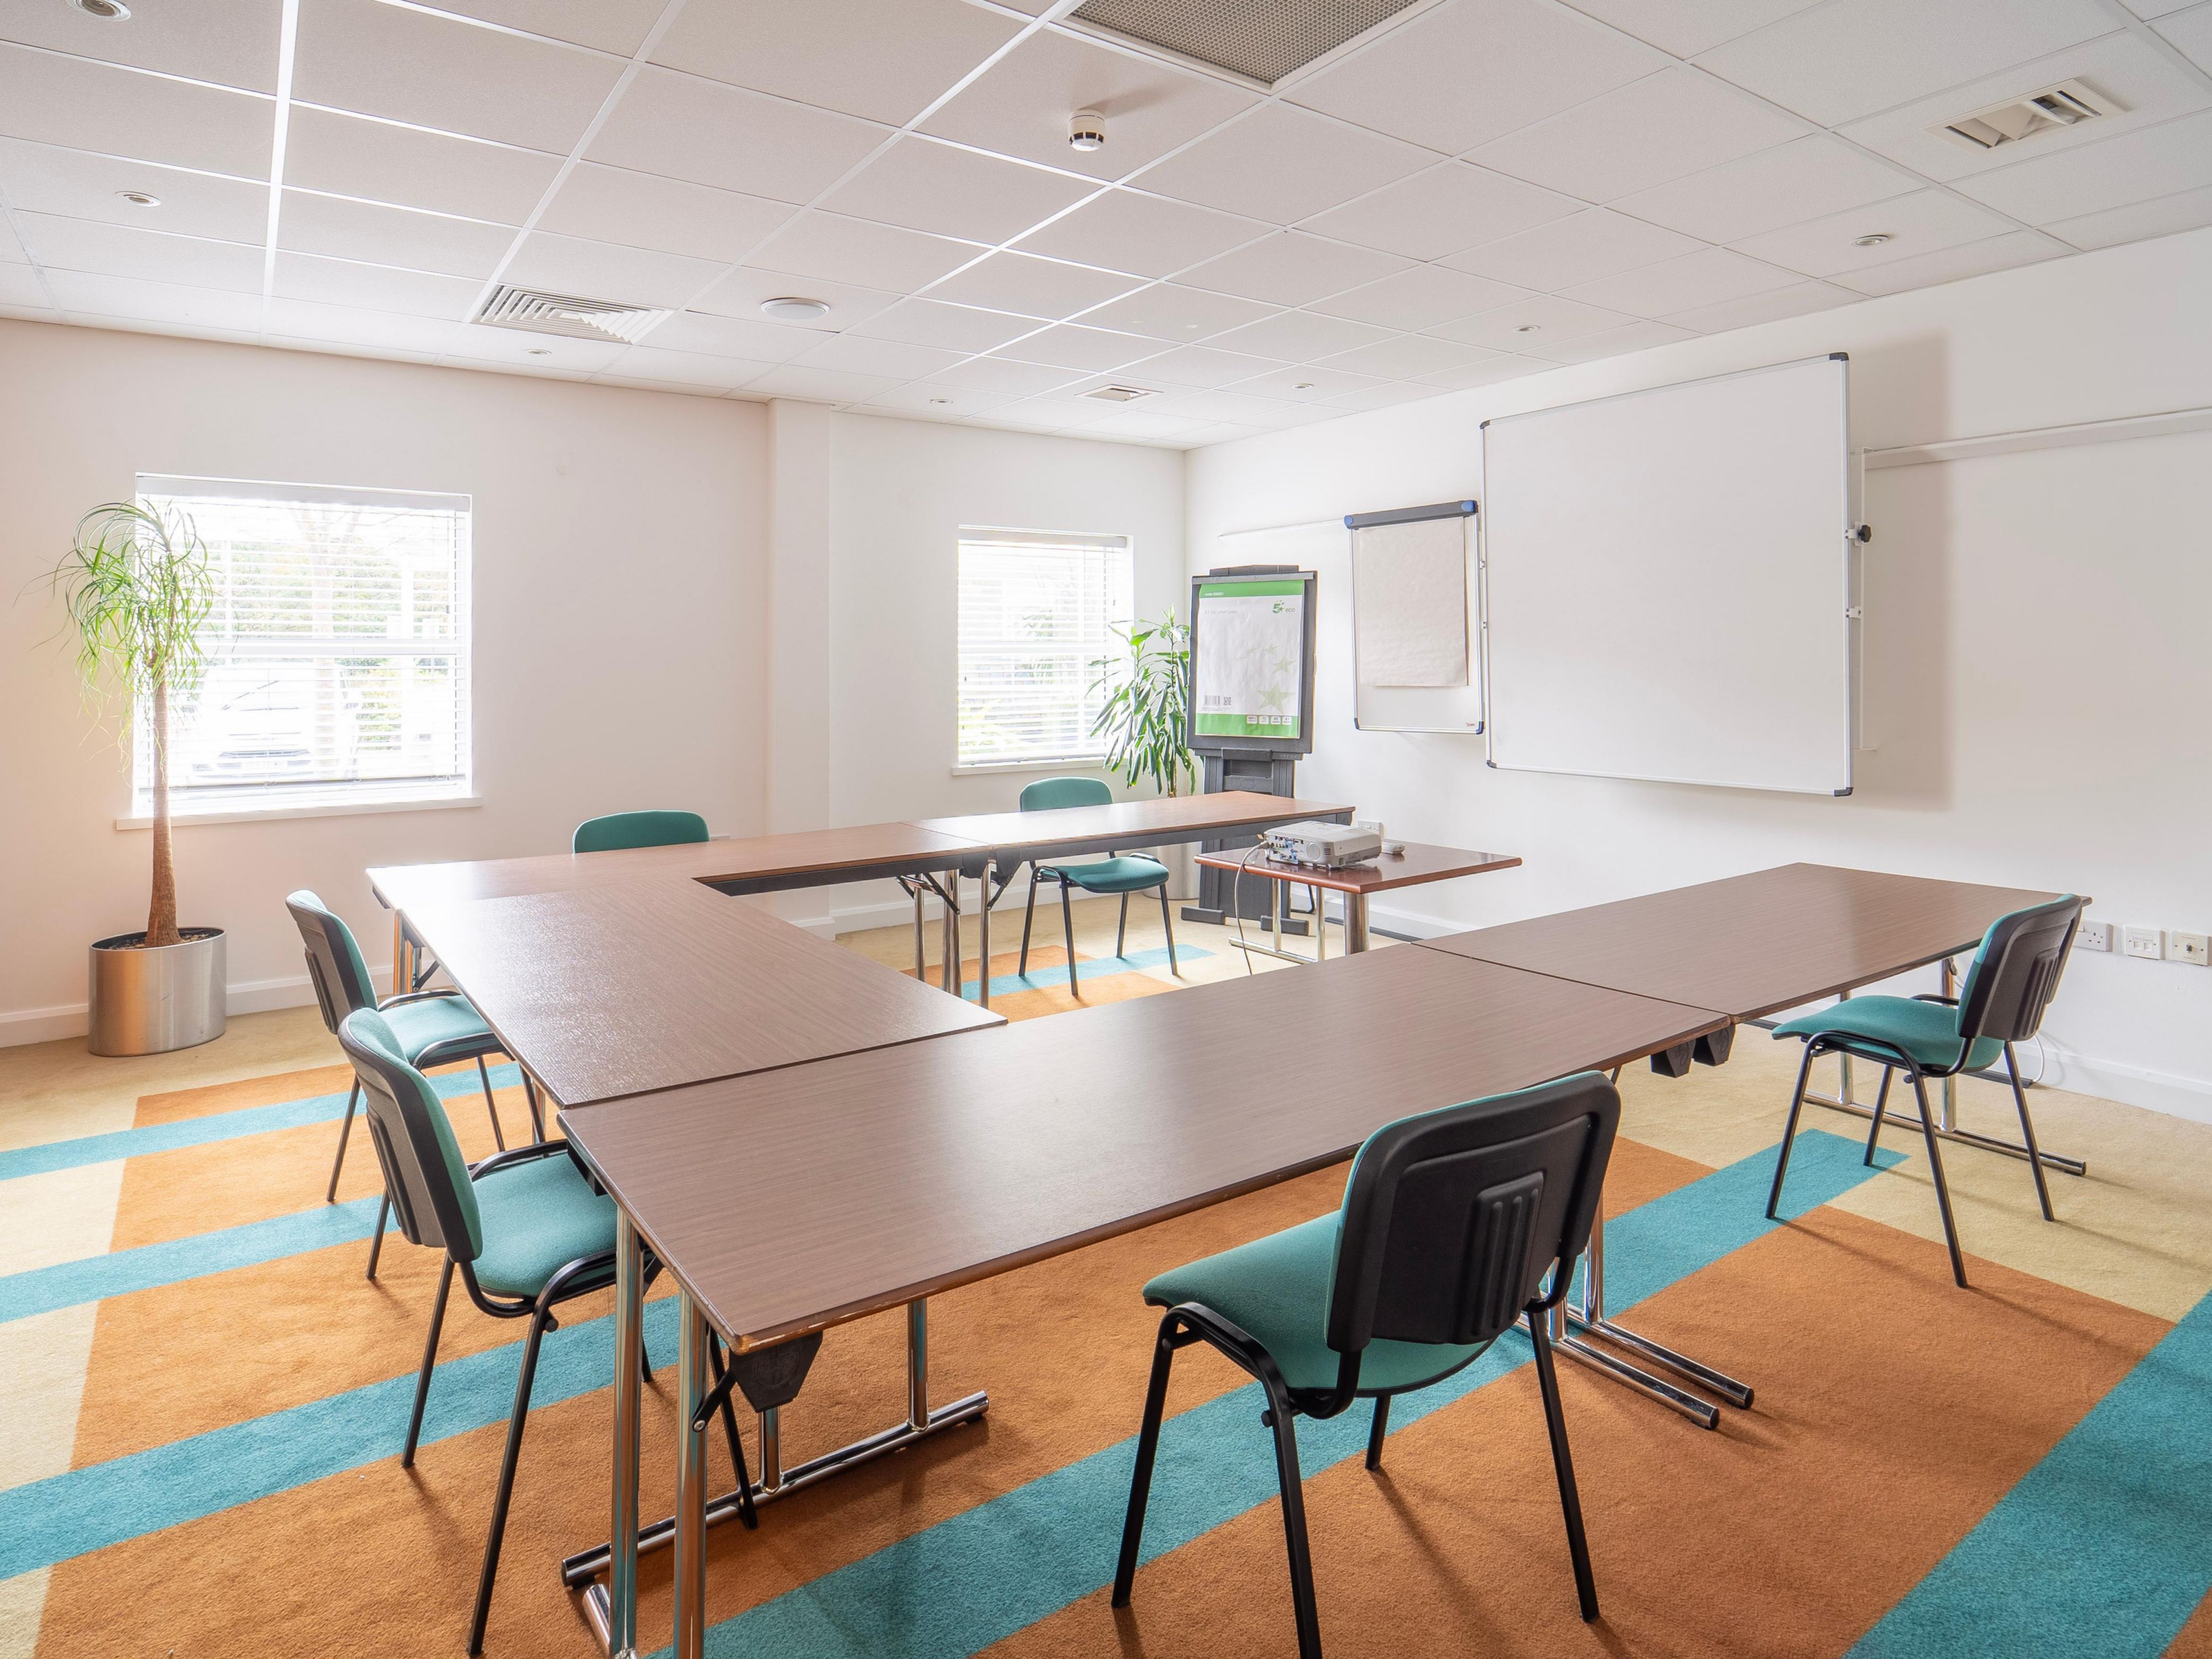 The hotel has two flexible event rooms which can host meetings of up to 60 people when combined. There's natural light, air-conditioning, and free Wi-Fi. The hotel's friendly event team can help with arrangements, from AV equipment to your specific catering needs.